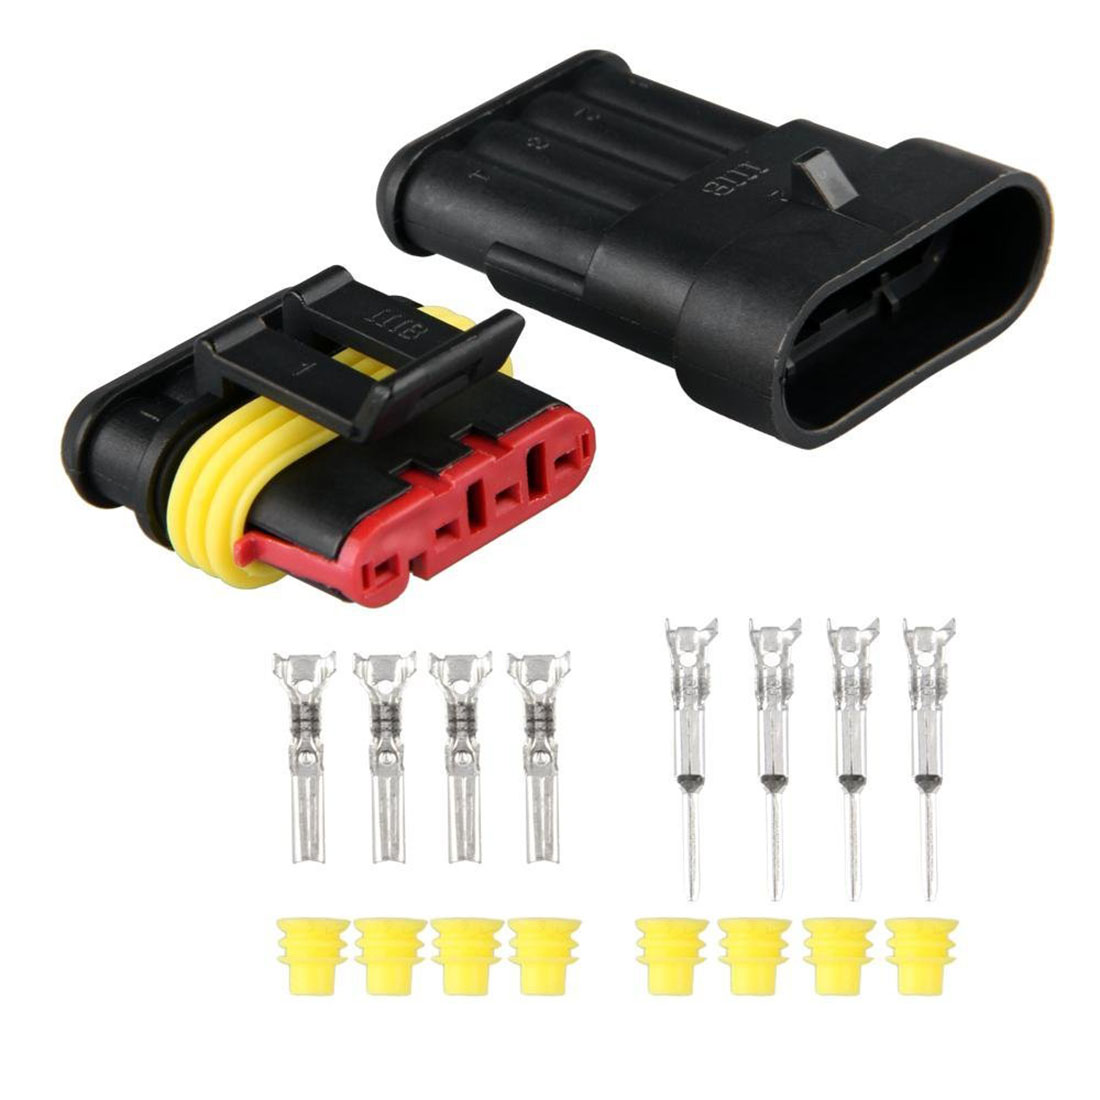 5 Sets Kits 4 Pin Way Waterproof Wire Connector Plug Car Auto Sealed Electrical Set High